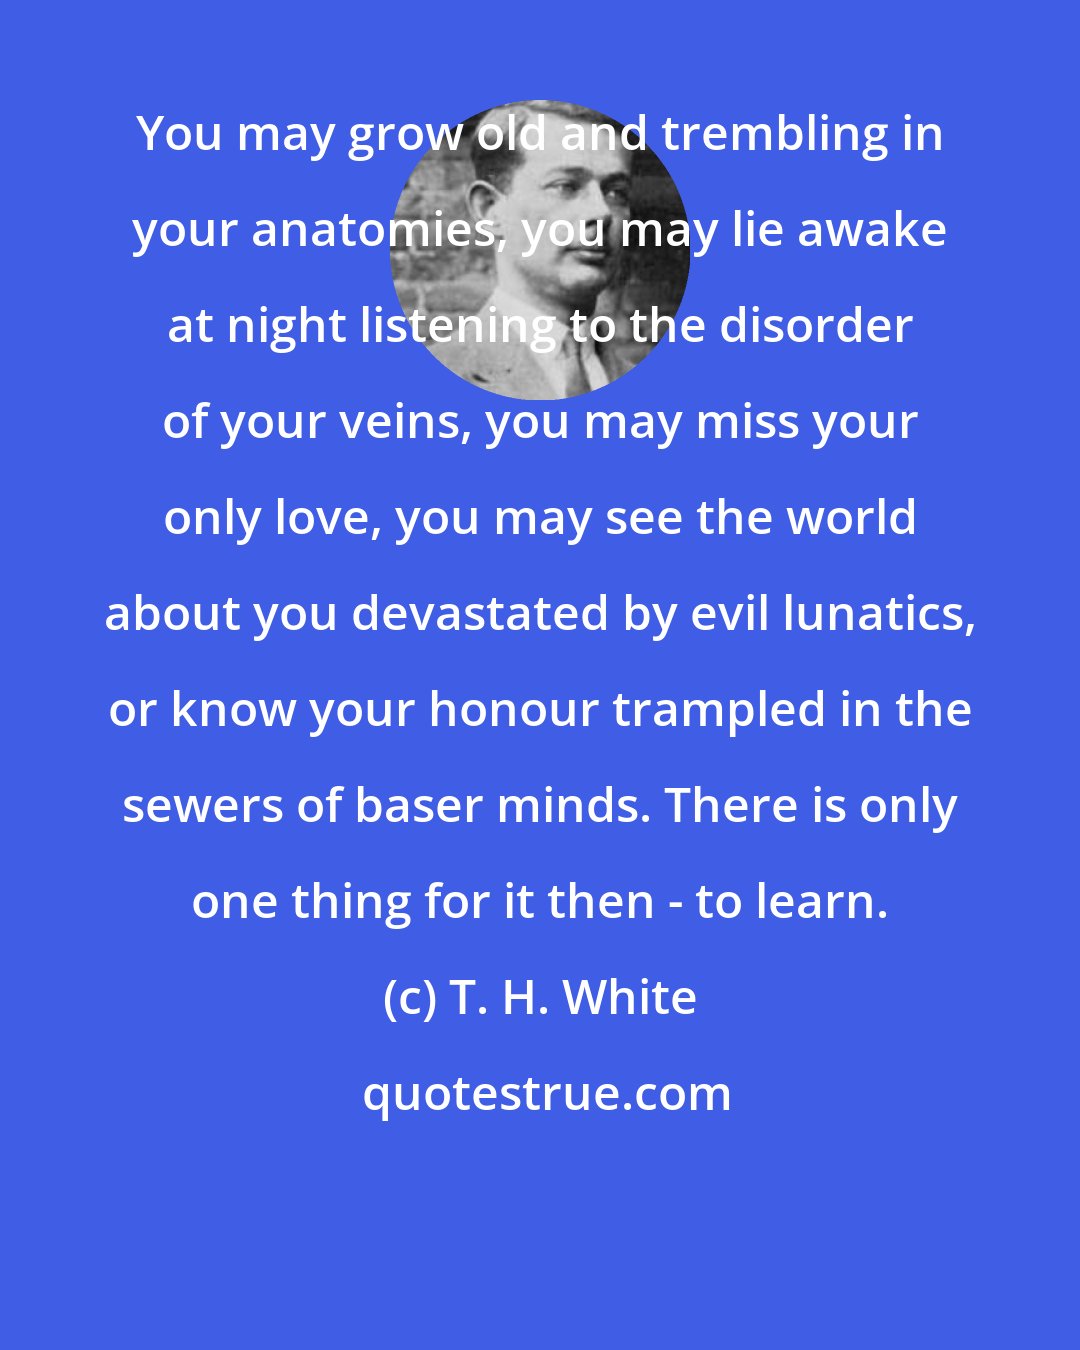 T. H. White: You may grow old and trembling in your anatomies, you may lie awake at night listening to the disorder of your veins, you may miss your only love, you may see the world about you devastated by evil lunatics, or know your honour trampled in the sewers of baser minds. There is only one thing for it then - to learn.